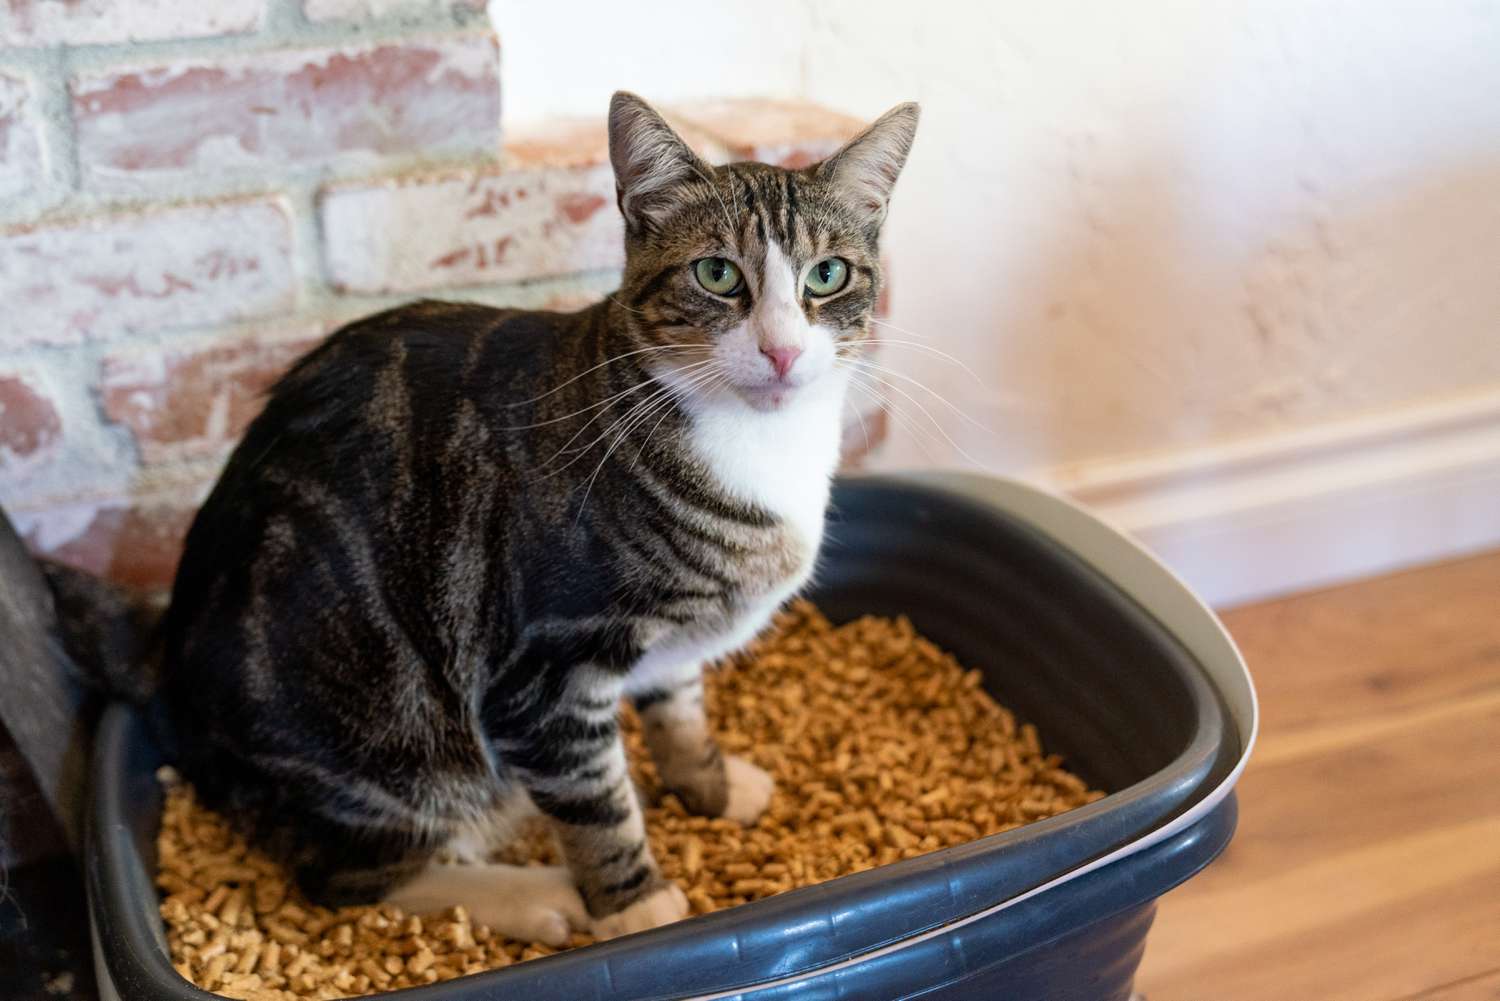 What is the healthiest type of cat litter?